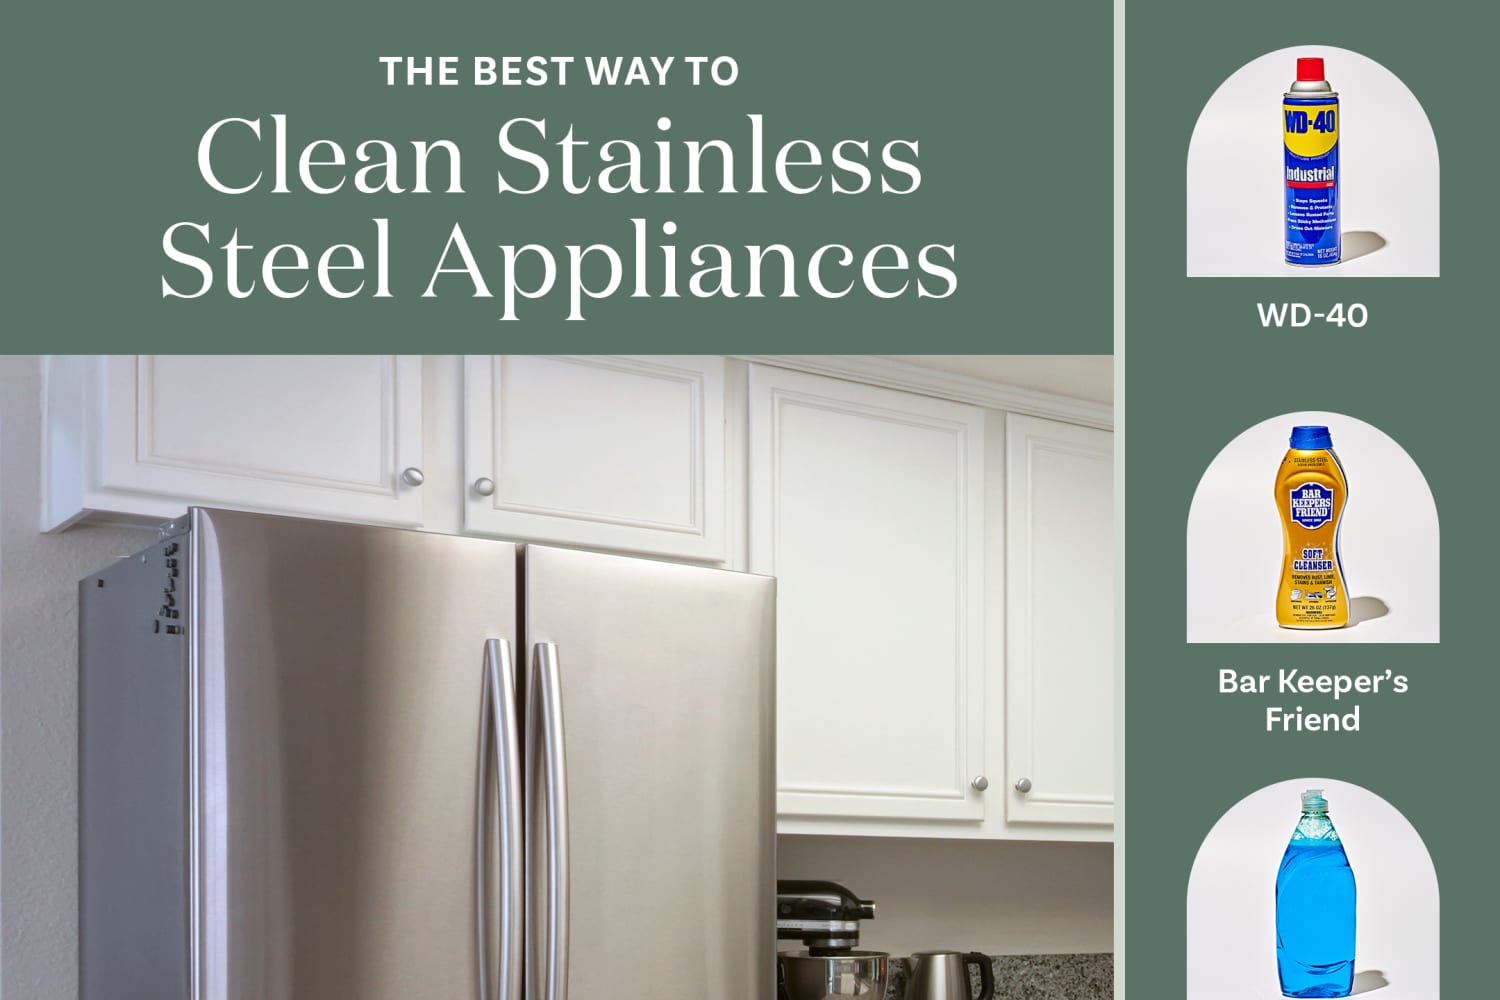 Tips for Cleaning Appliances at Home